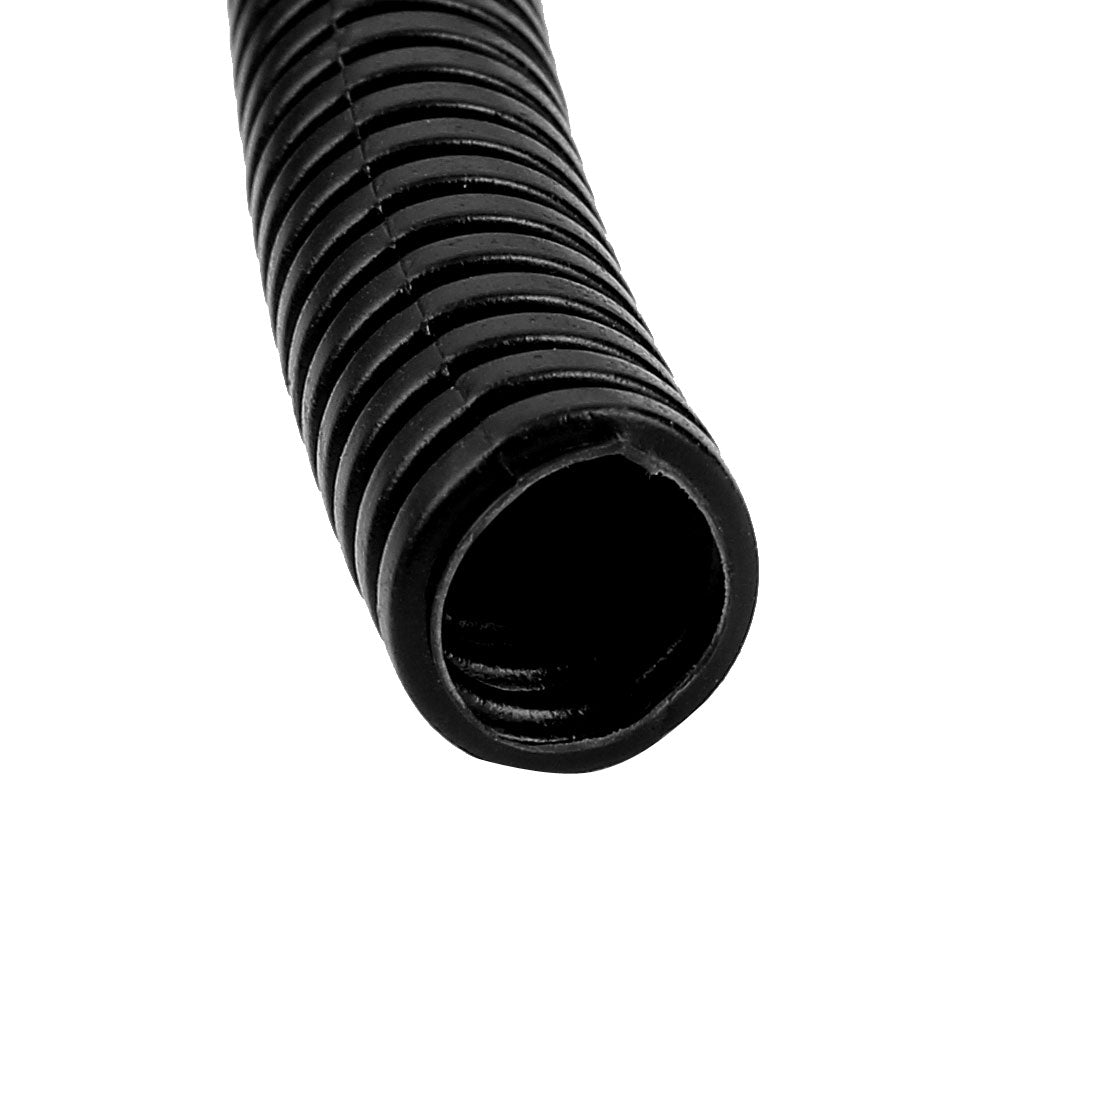 uxcell Uxcell 15.8 M 10 x 13 mm Plastic Corrugated Conduit Tube for Garden,Office Black